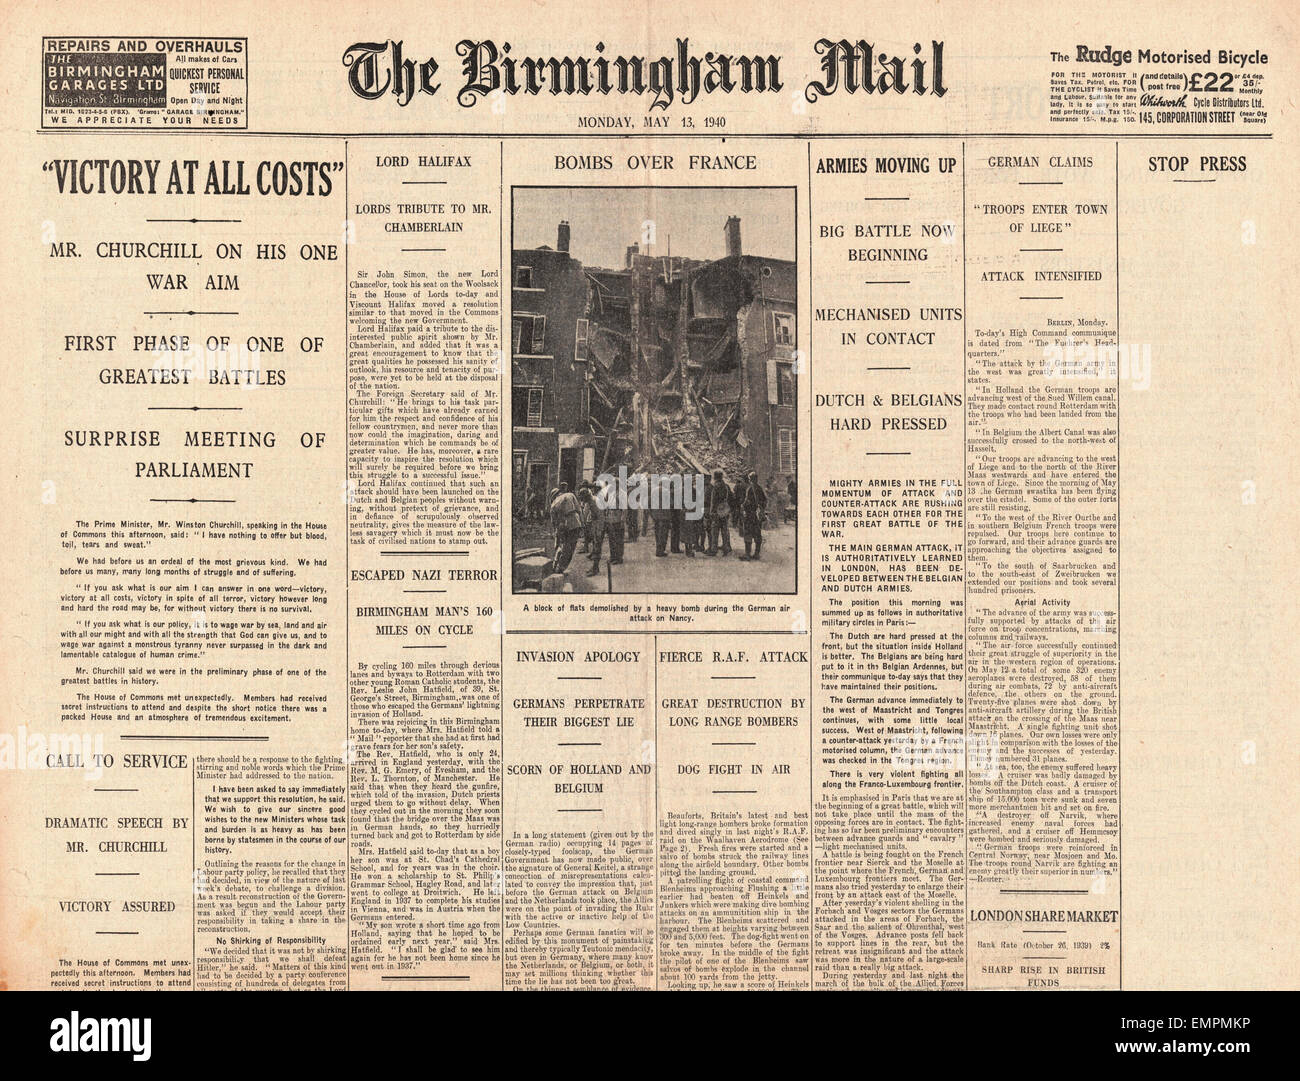 1940 front page Birmingham Mail Churchill Speech 'Victory at all costs' speaking of 'Blood, Toil, Tears sweat' Stock Photo